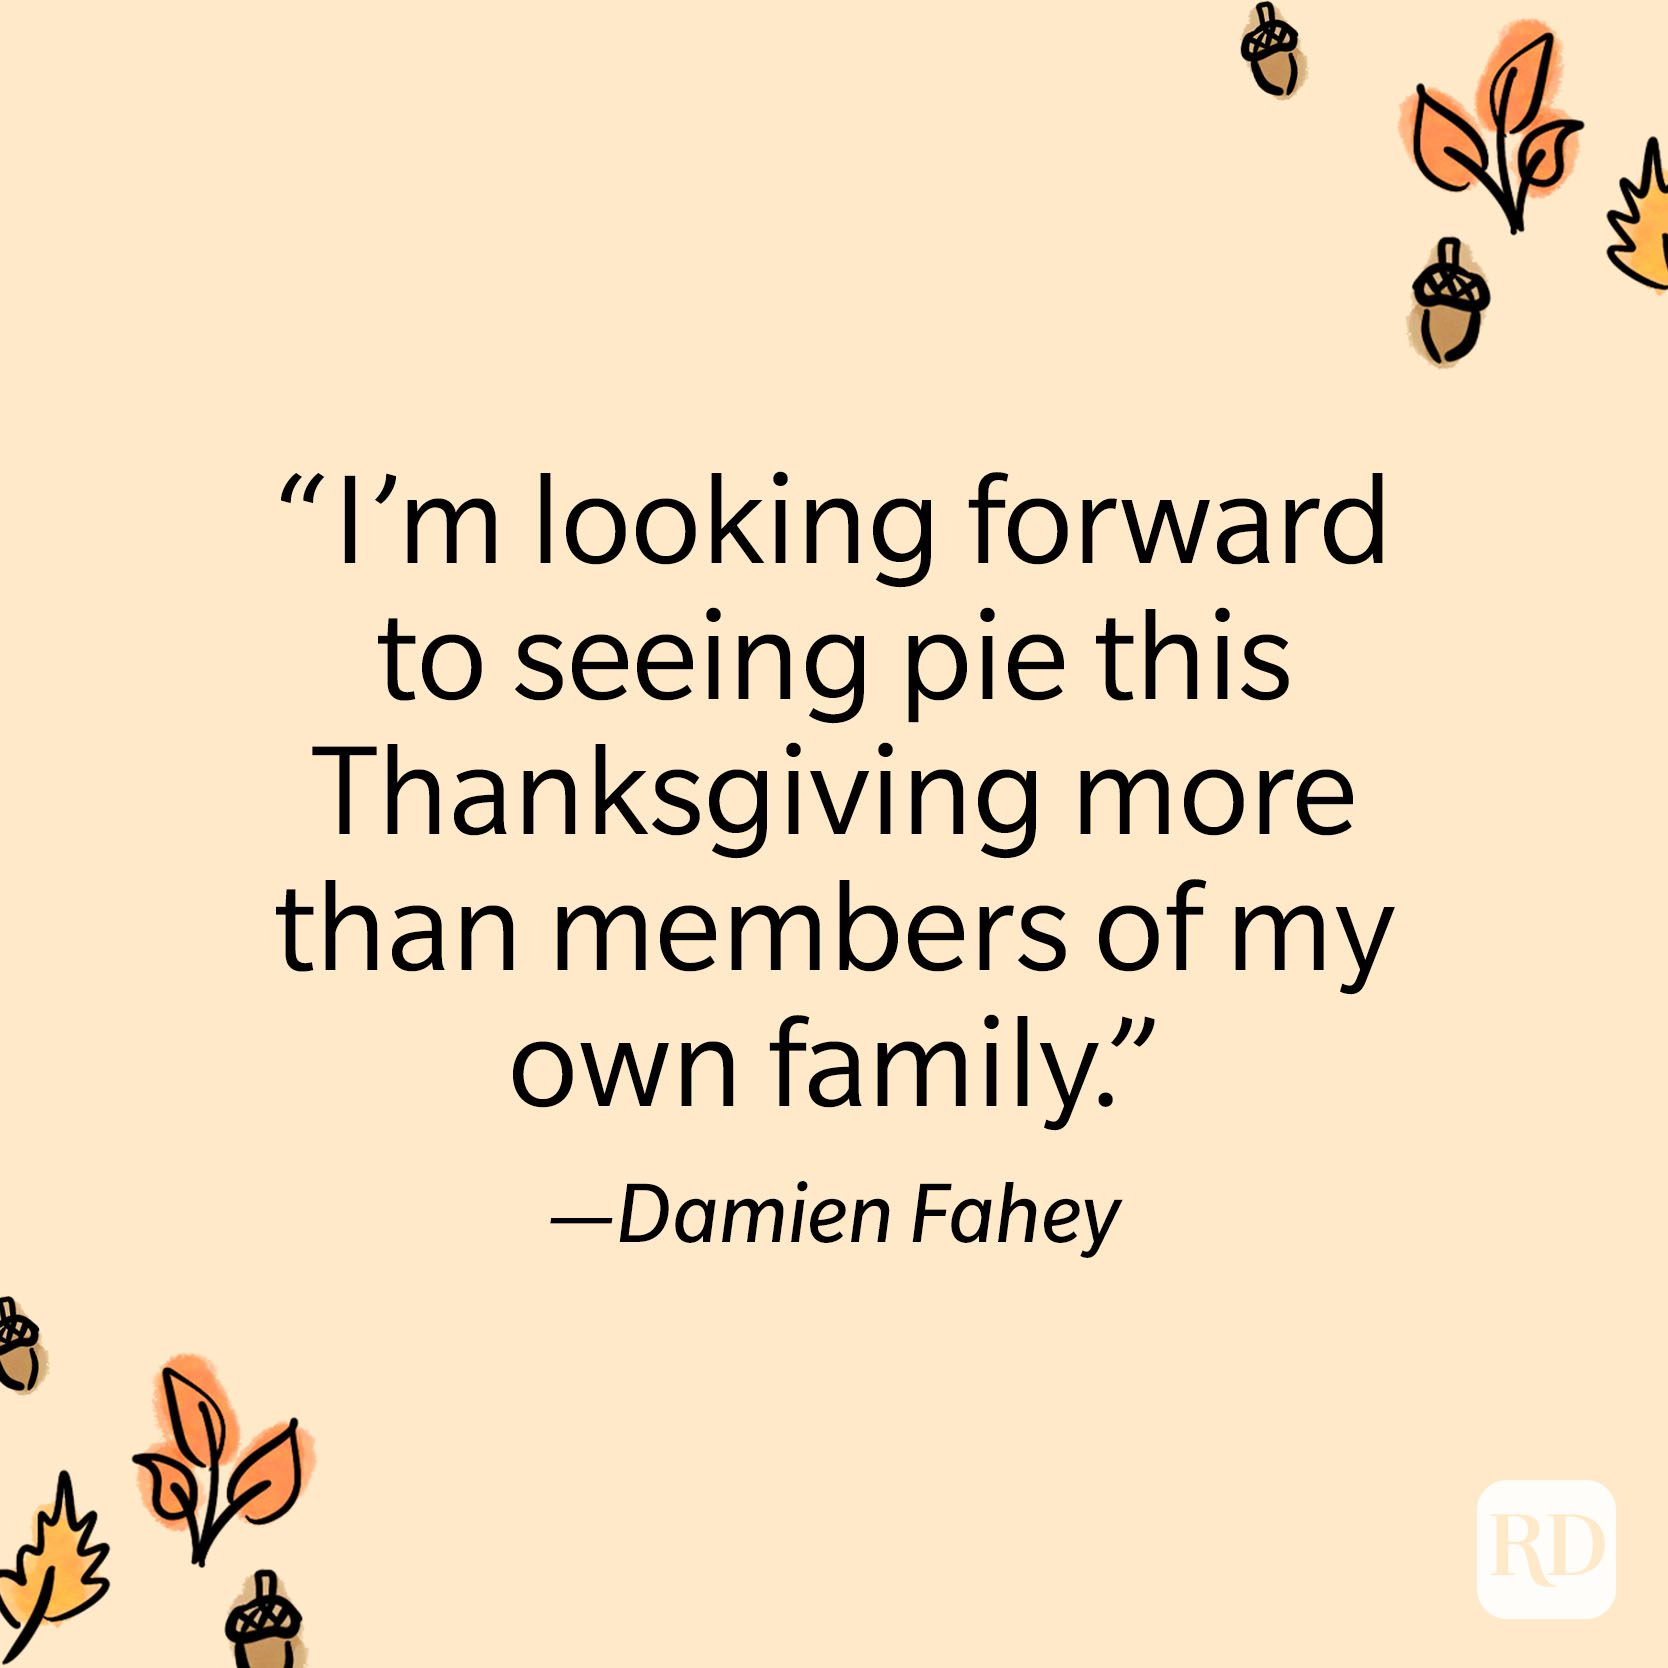 Damien Fahey Thanksgiving Quote